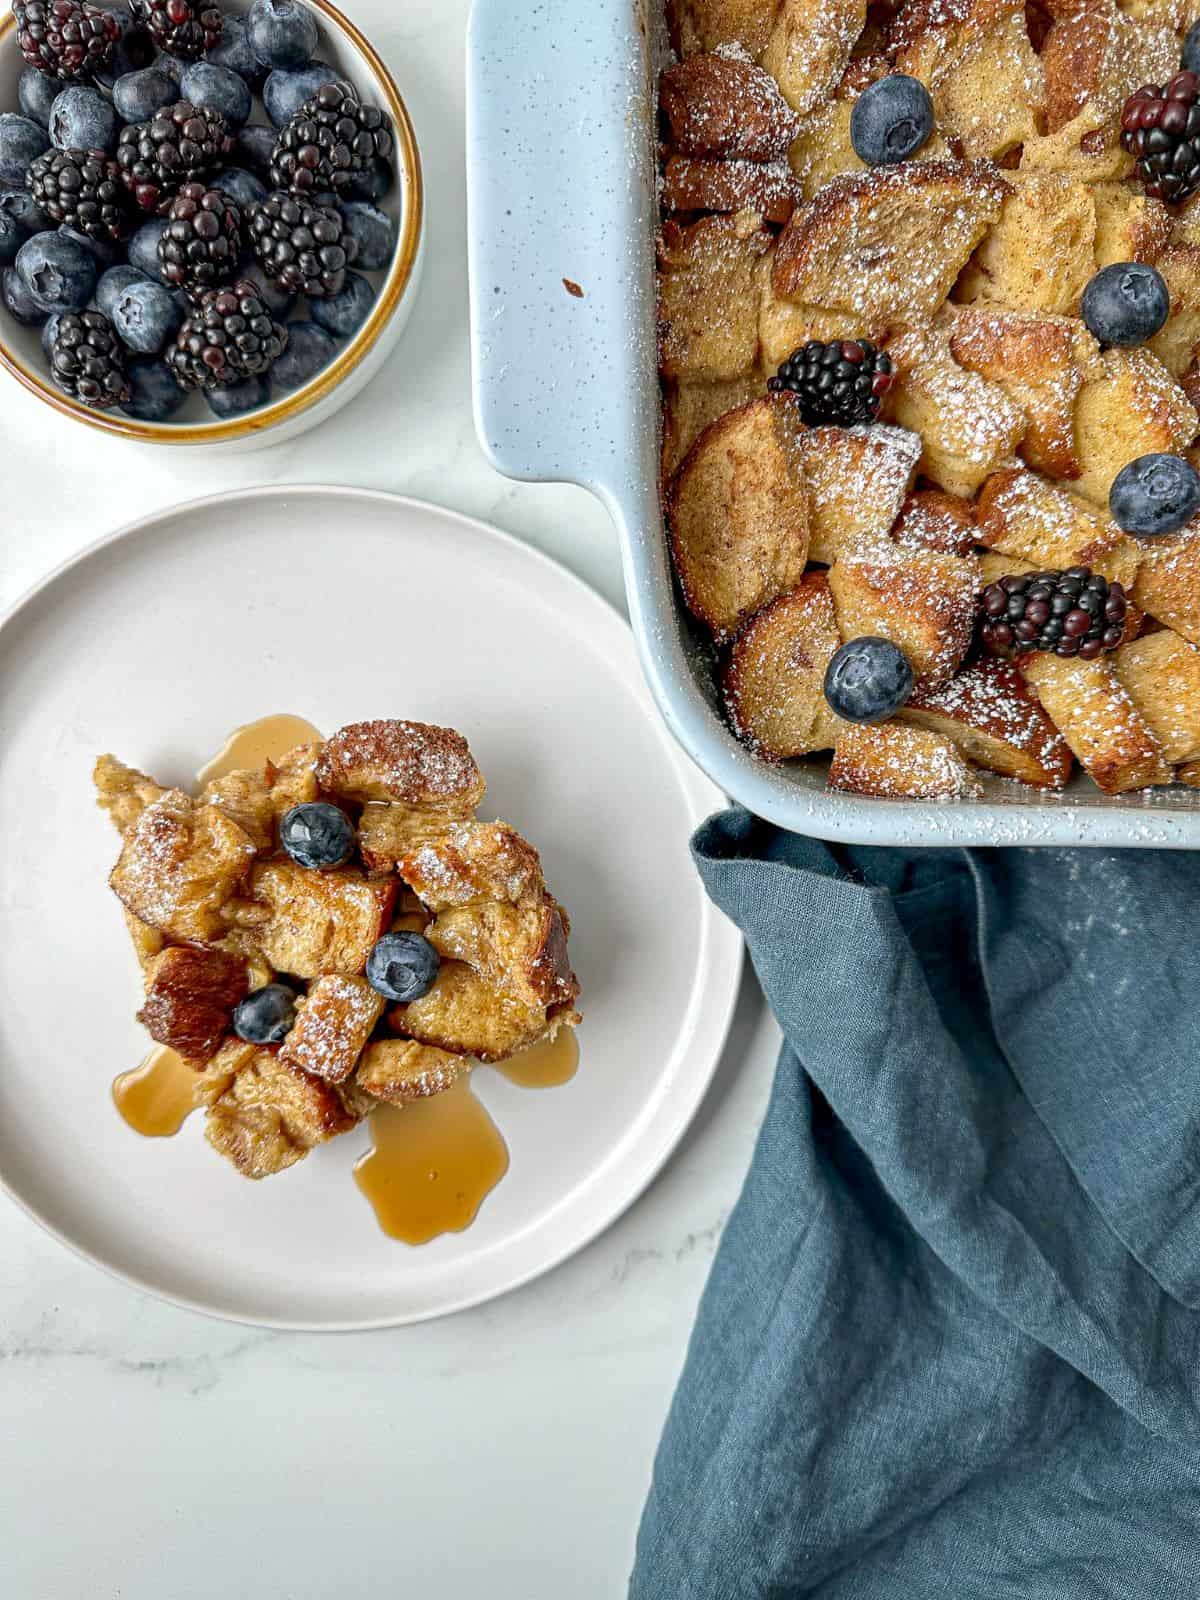 Baked French toast casserole in a baking dish. A plate with a square slice is next the dish. The brioche casserole is topped with blueberries, blackberries, and powdered sugar.